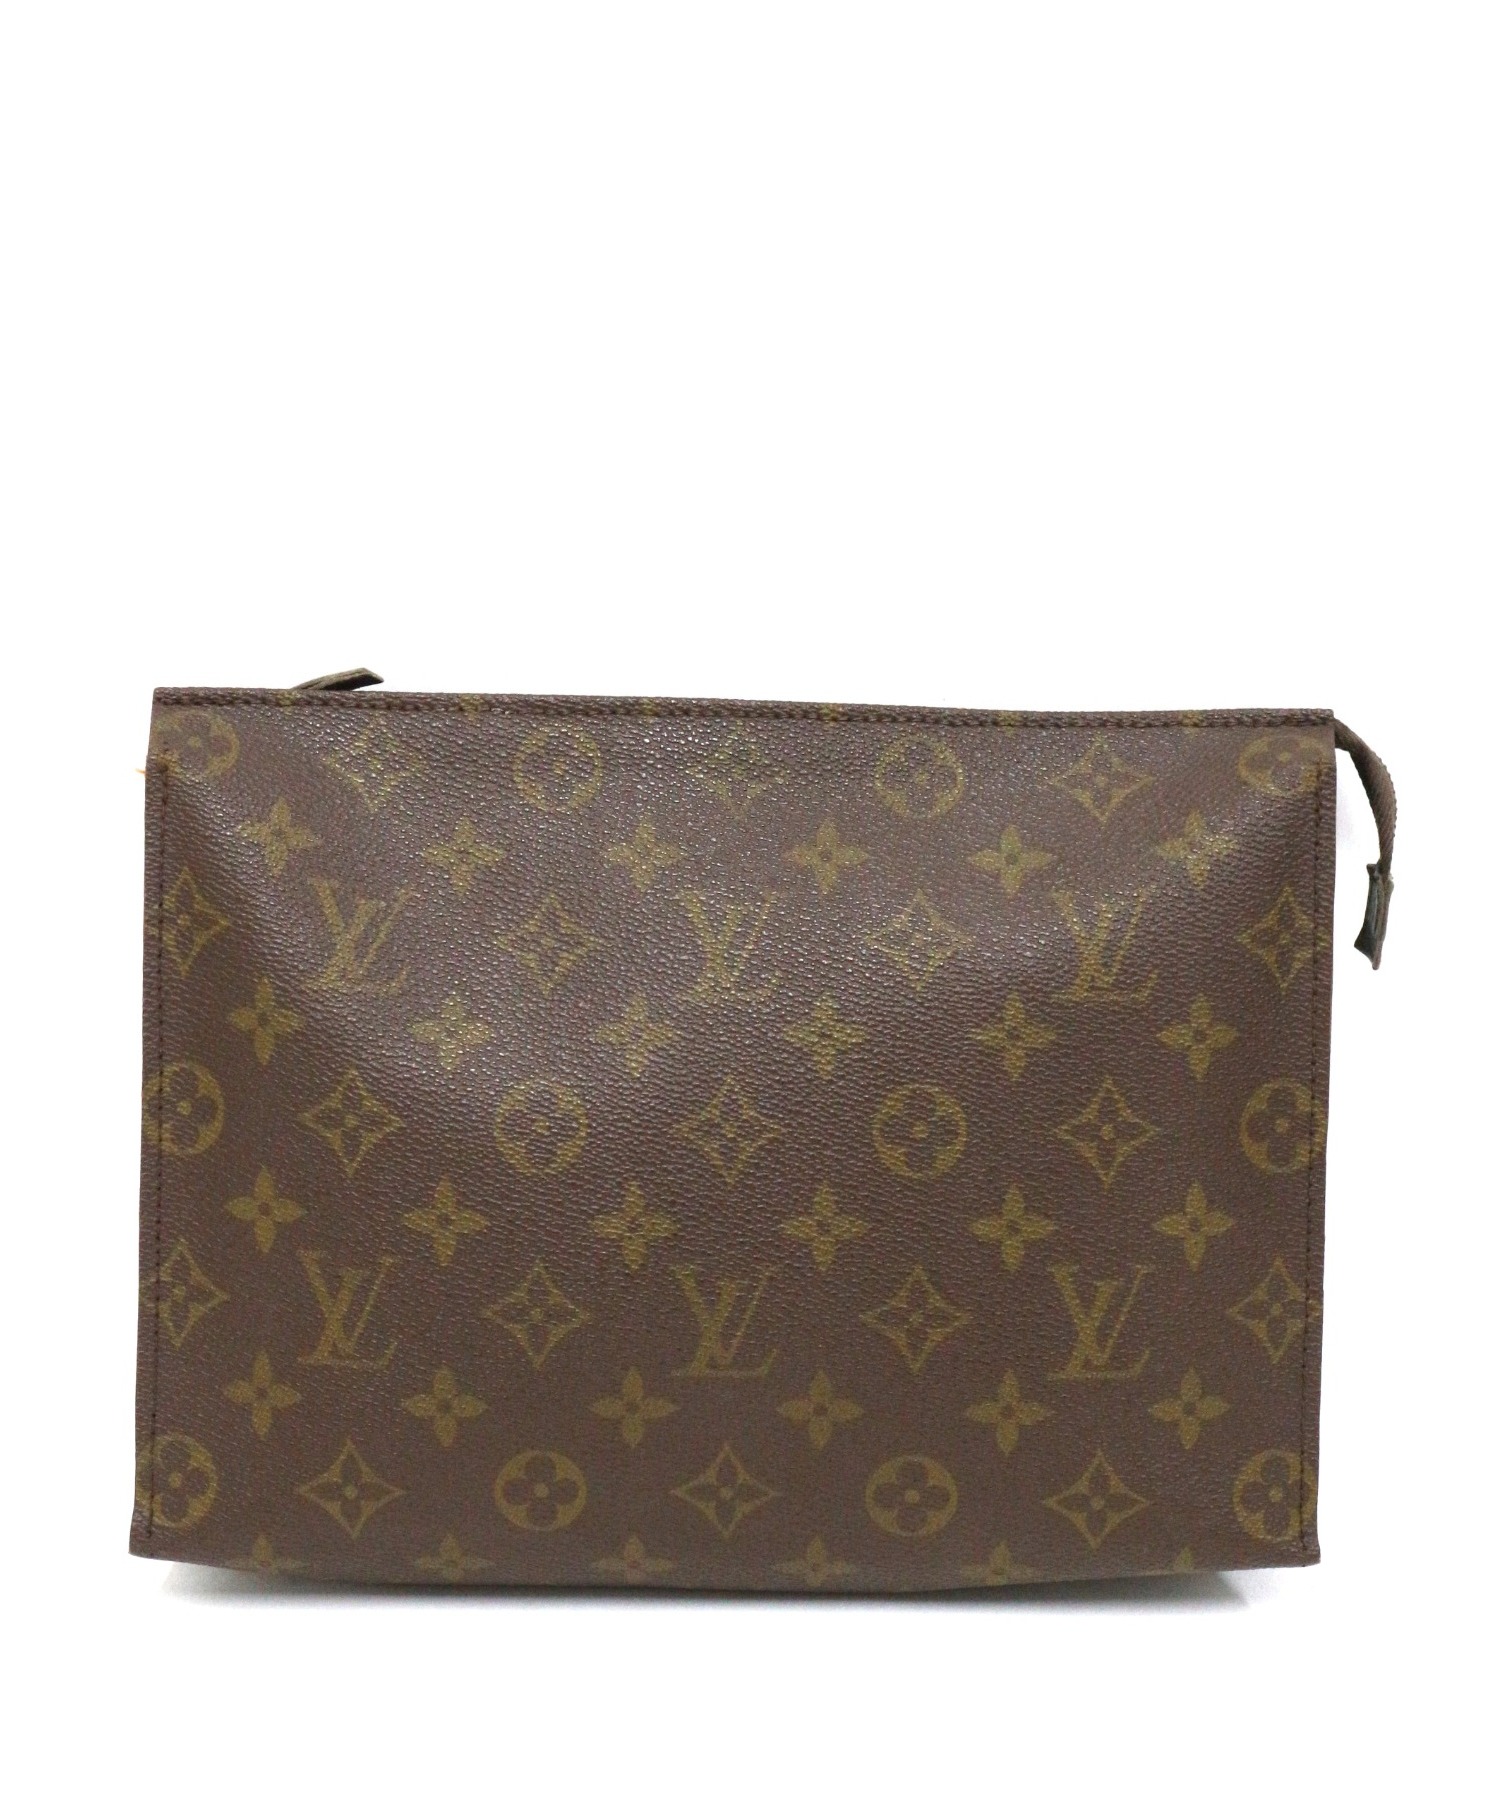 LOUIS VUITTON セカンドバッグ　ルイヴィトン素人採寸です